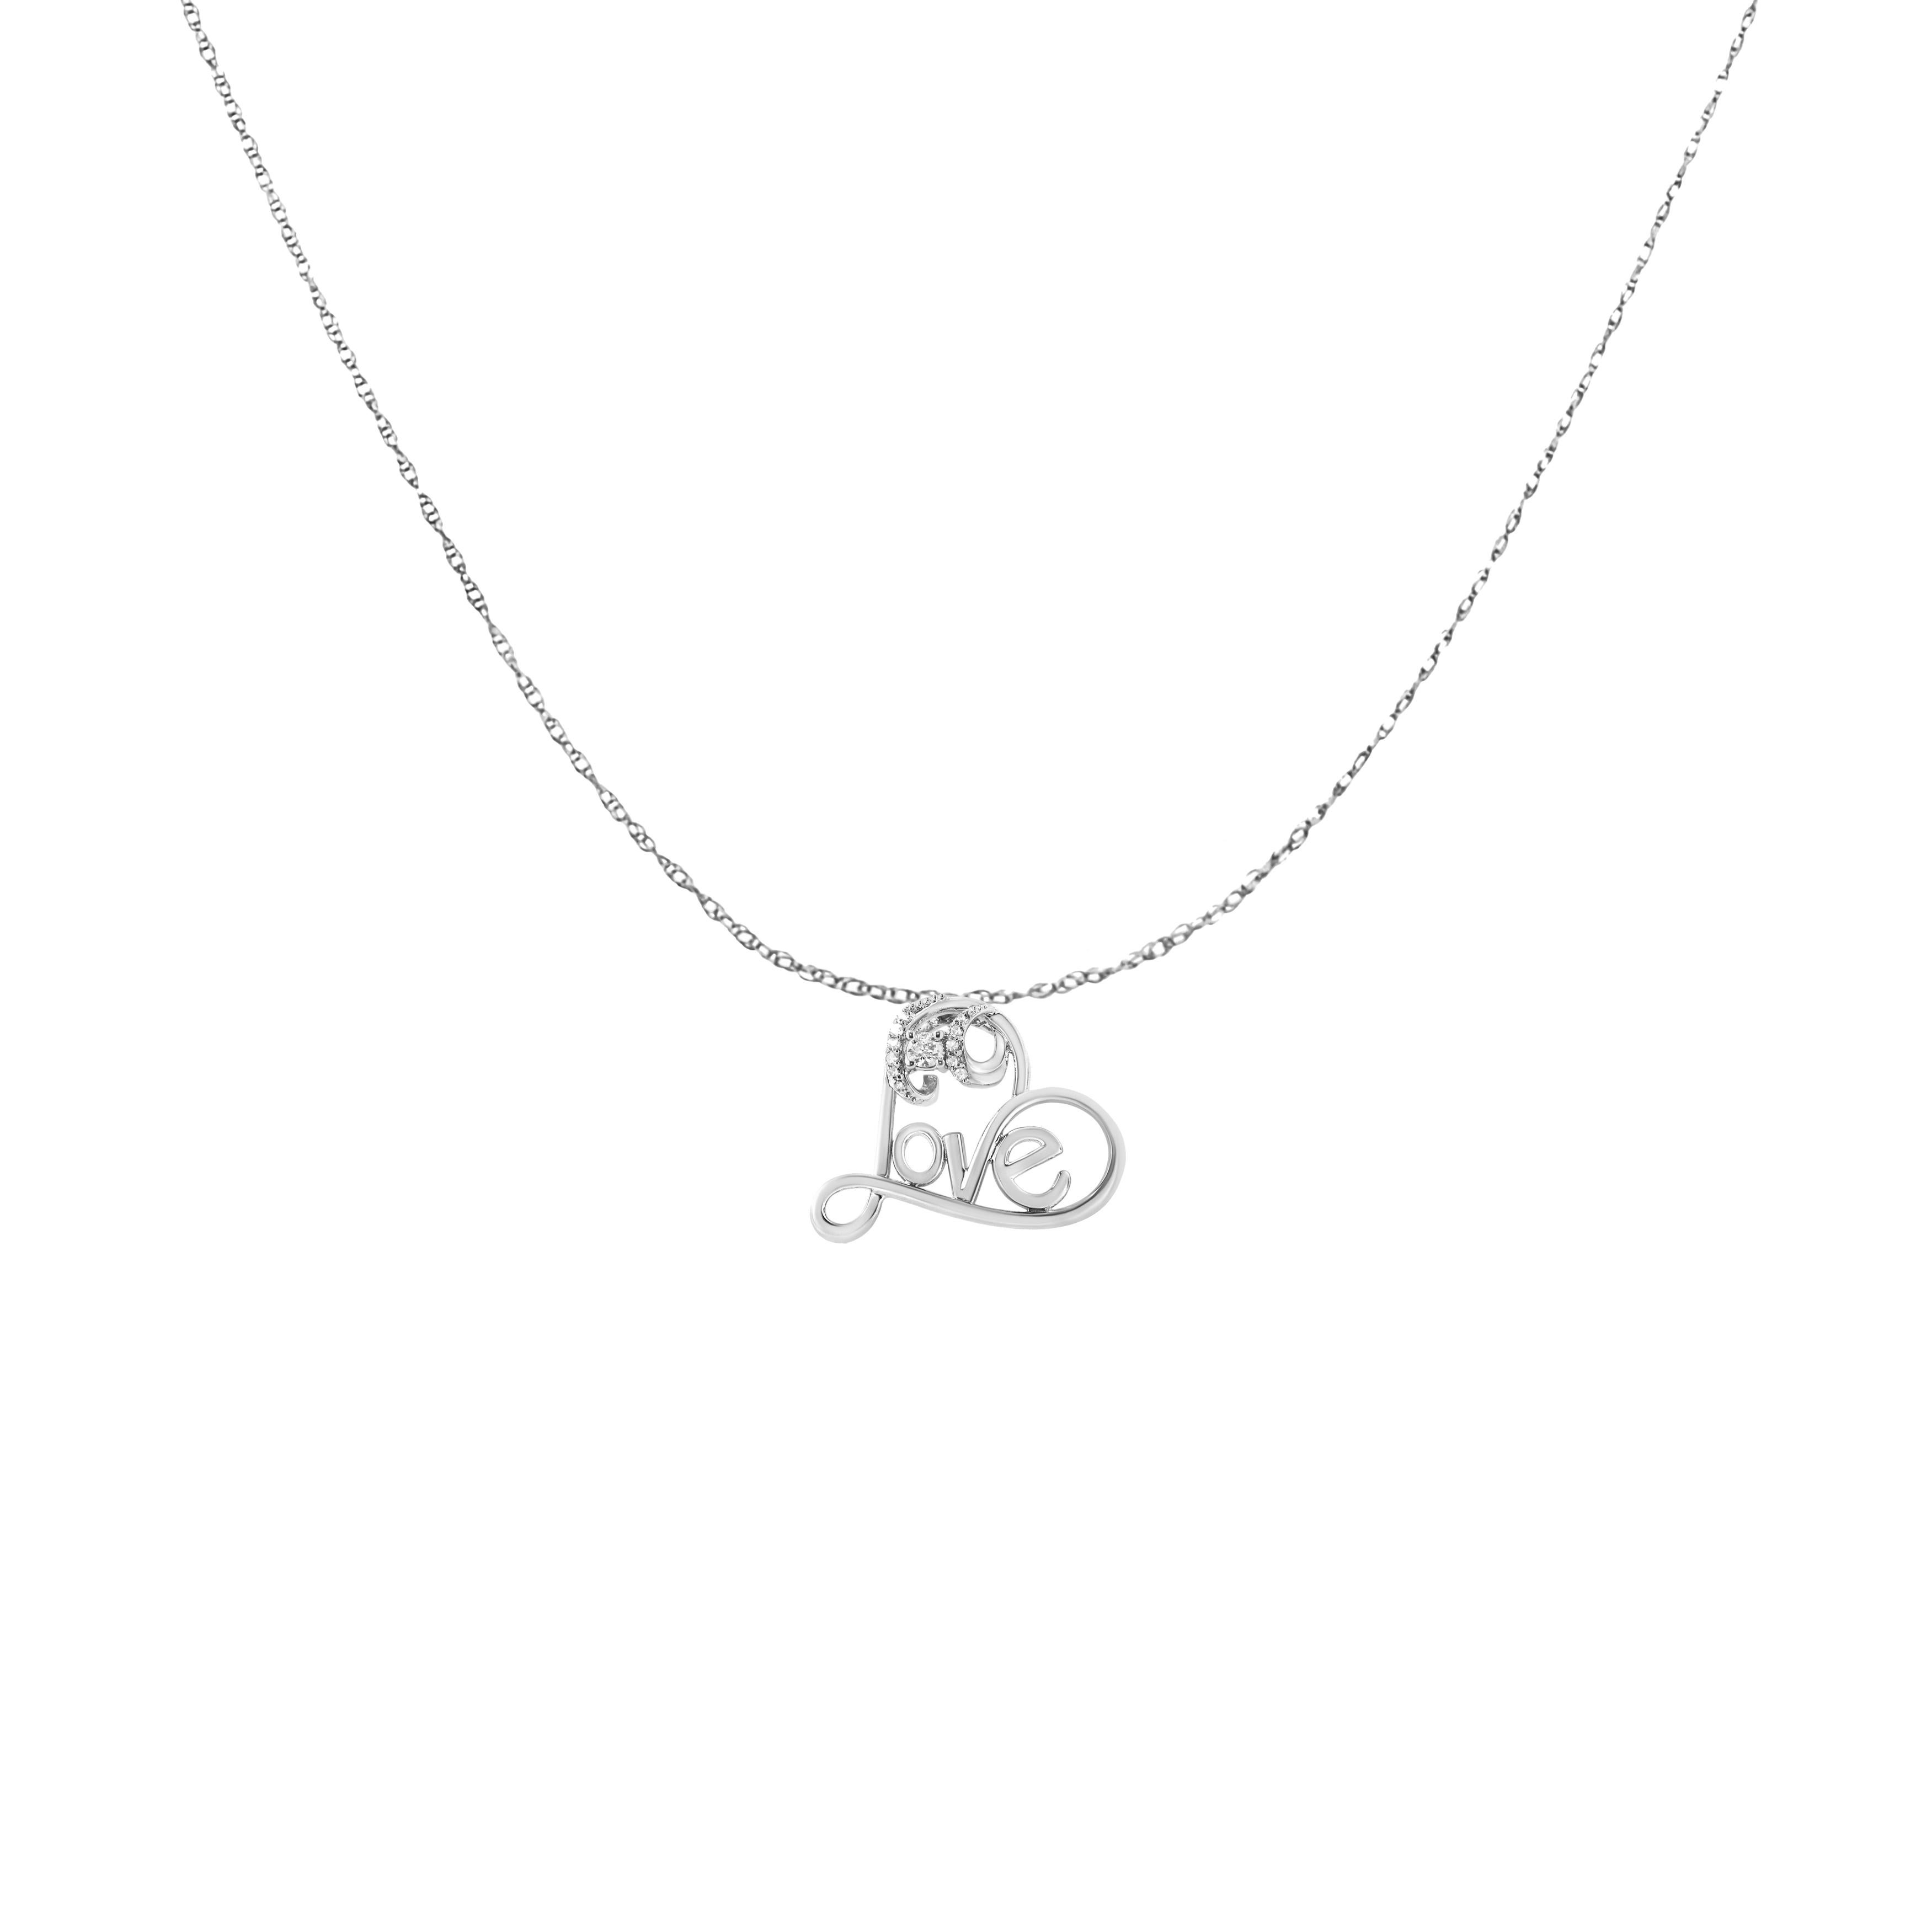 Contemporary .925 Sterling Silver 1/6 Carat Diamond Heart Pendant Necklace For Sale